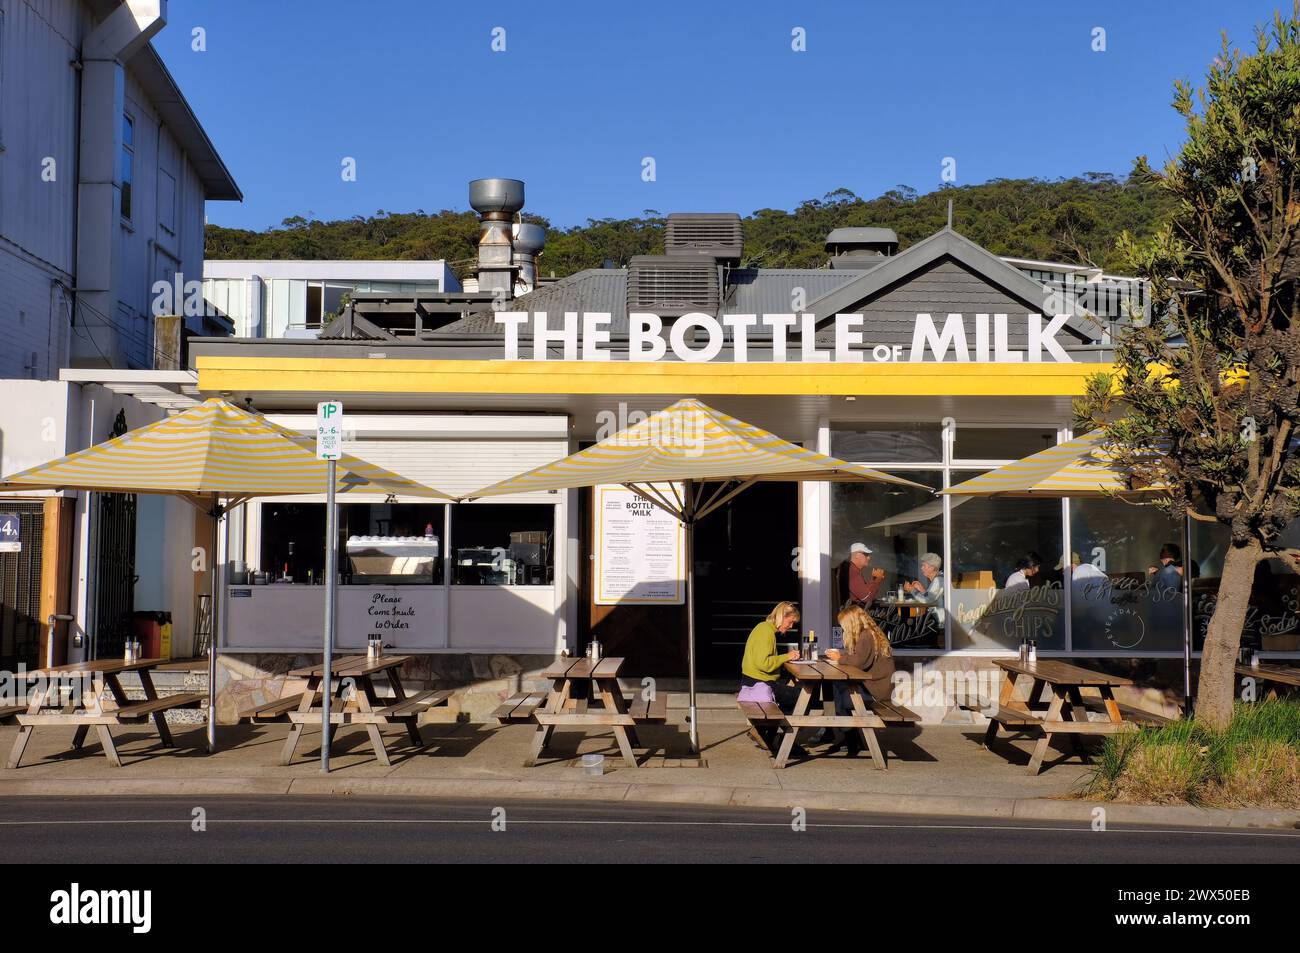 Lorne: The Bottle of Milk café with outdoor seating, umbrellas and diners at Lorne Stock Photo